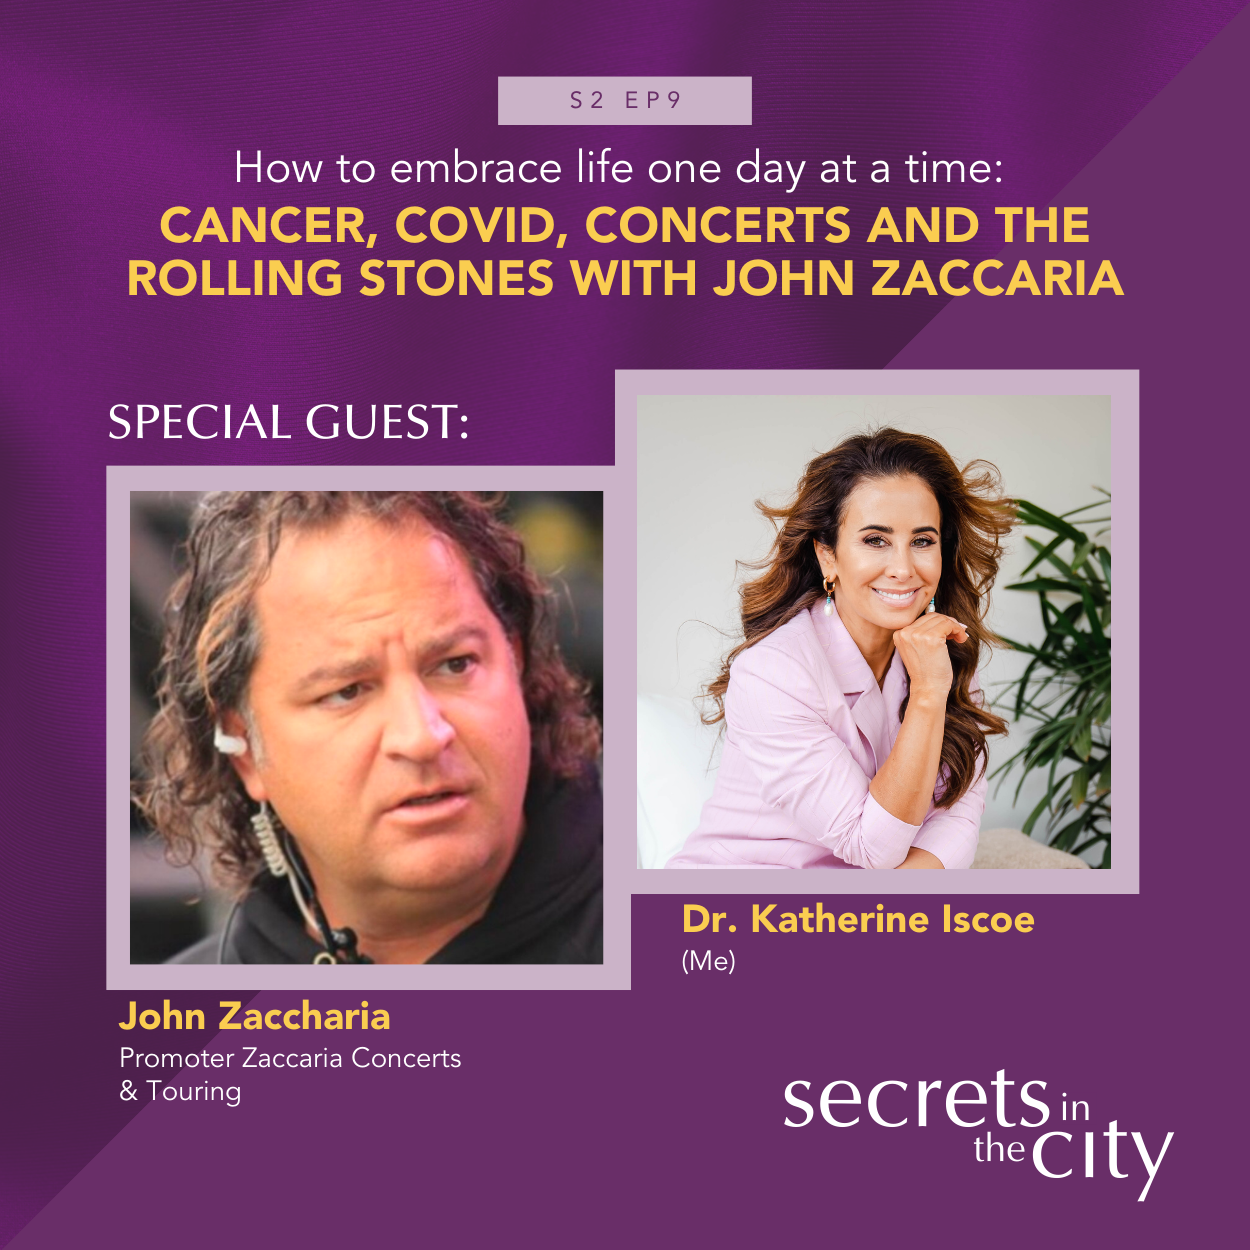 How to embrace life one day at a time: Cancer, Covid, Concerts and The Rolling Stones with John Zaccaria